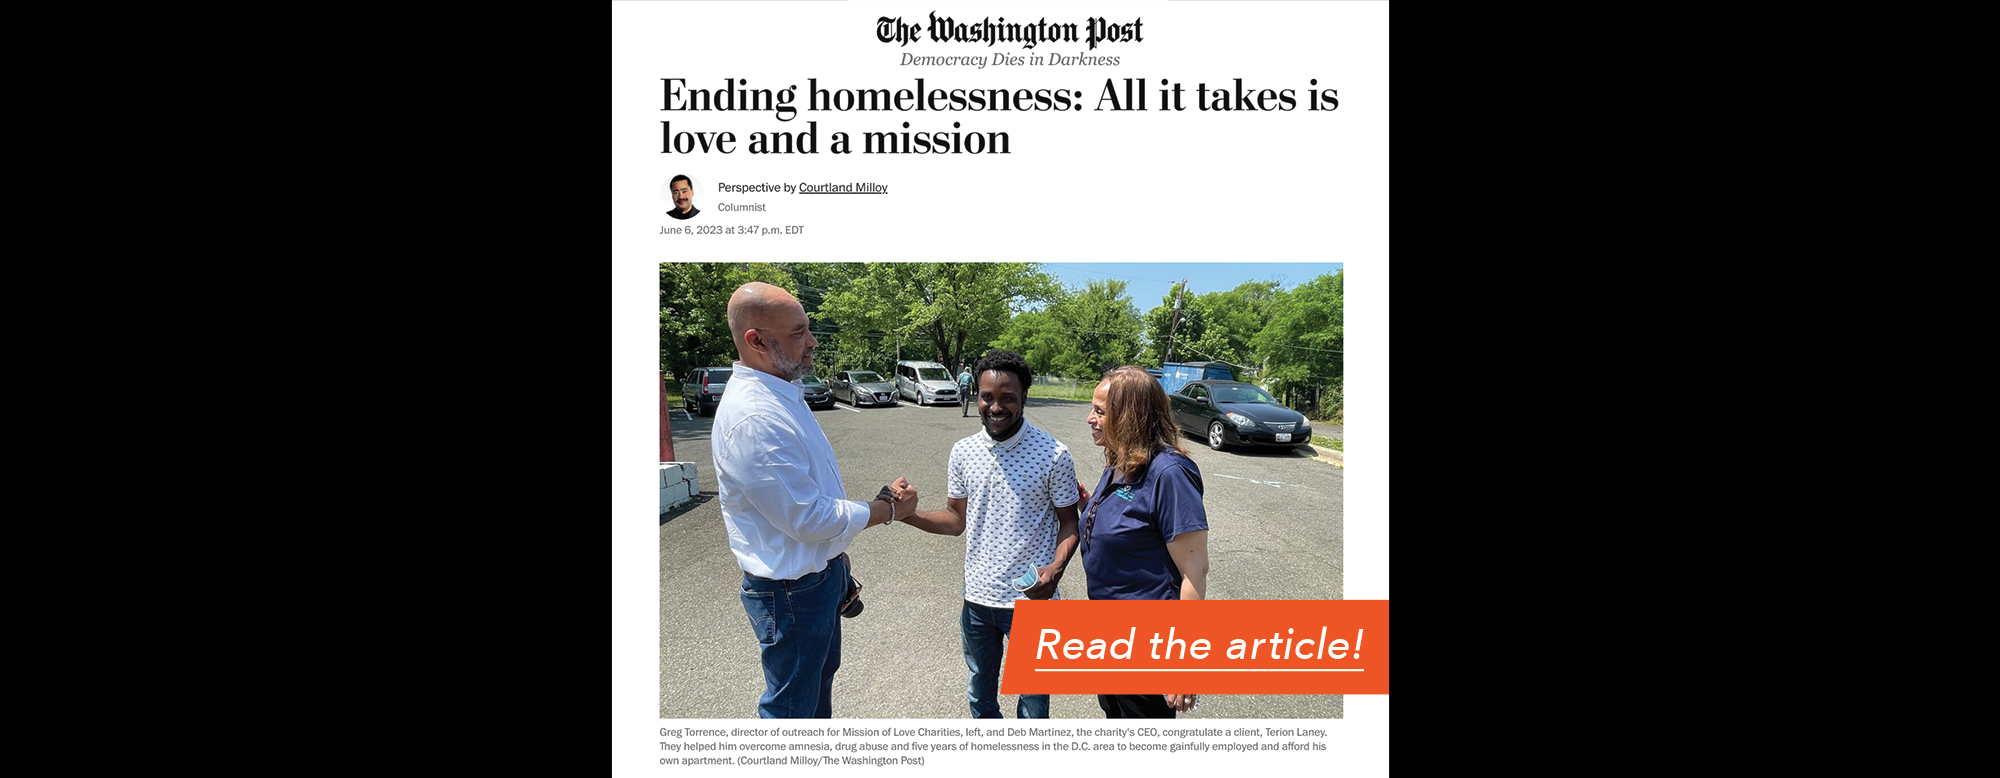 The Washington Post highlights MOLC in the article: “Ending homelessness: All it takes is love and a mission”